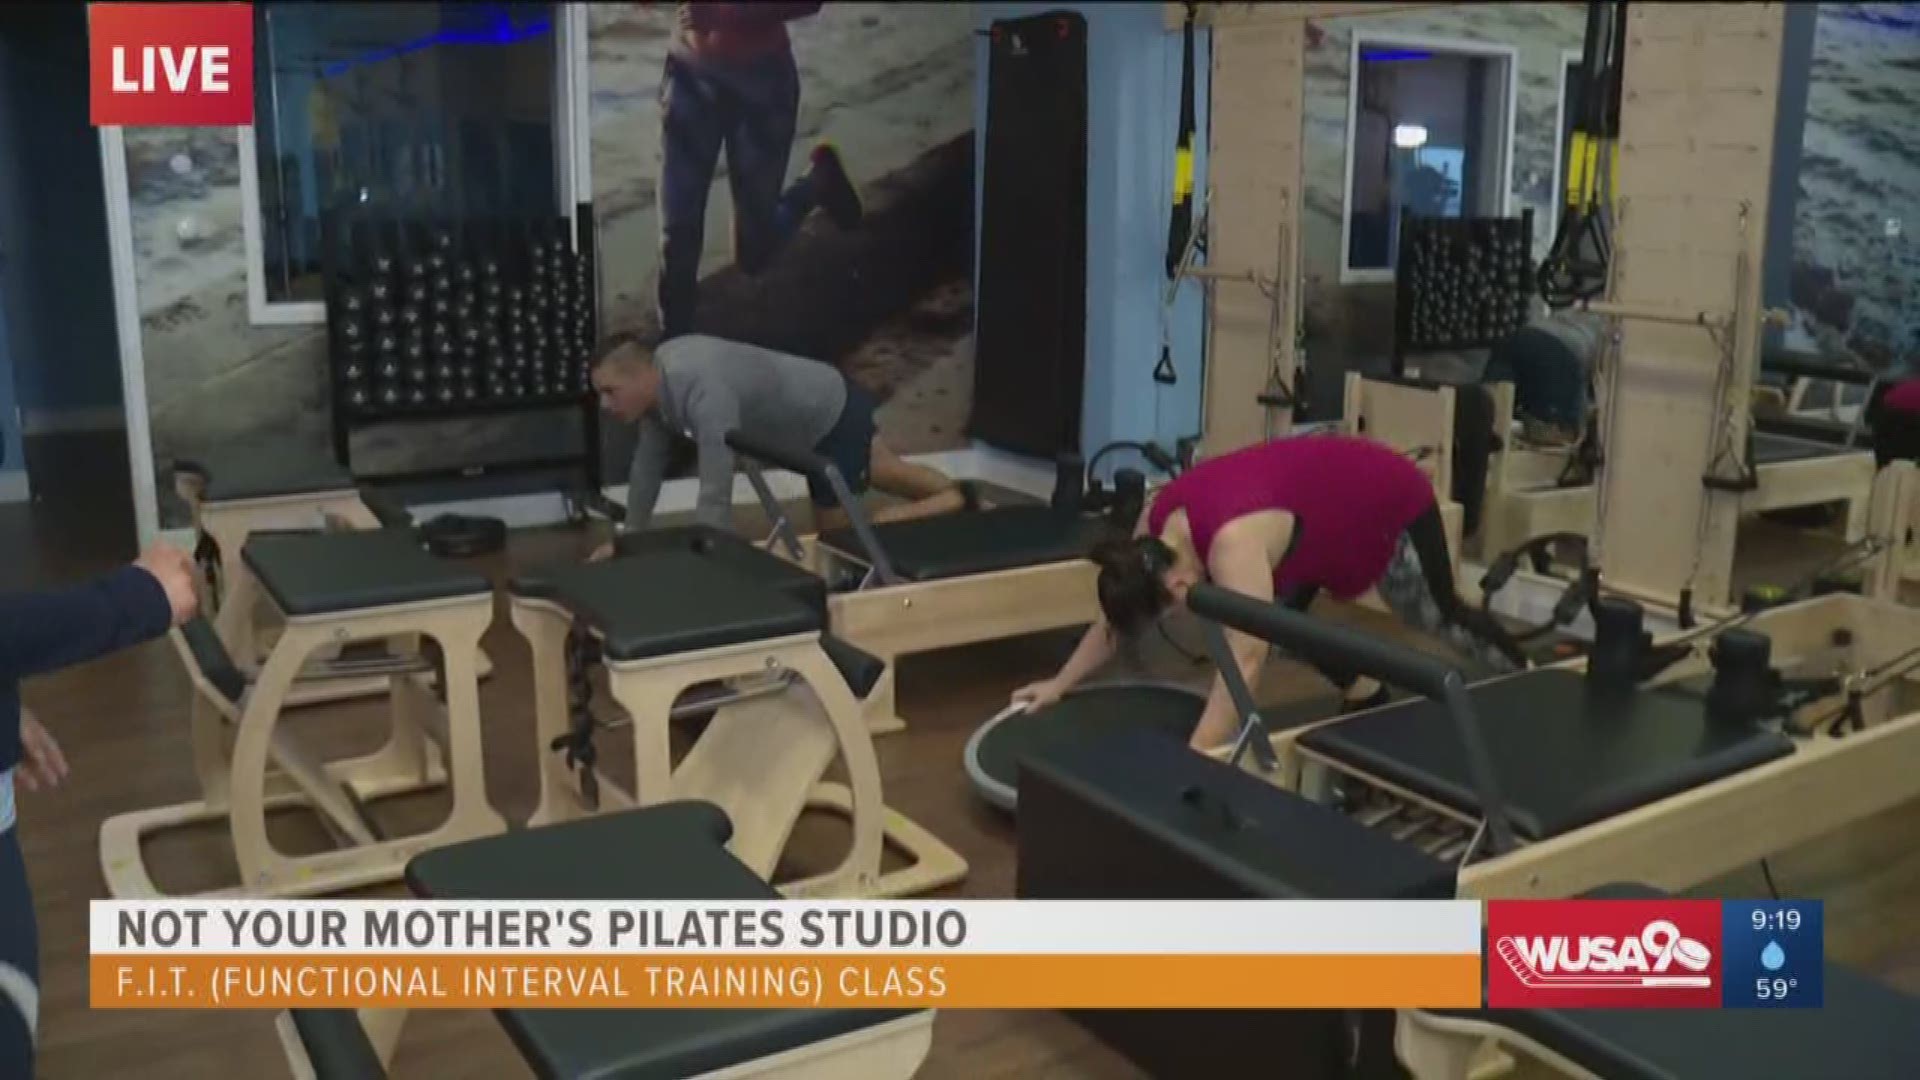 Watch Andi Hauser as she demonstrates some upgraded pilates moves that you can try at the new Club Pilates location in Tysons Corner.